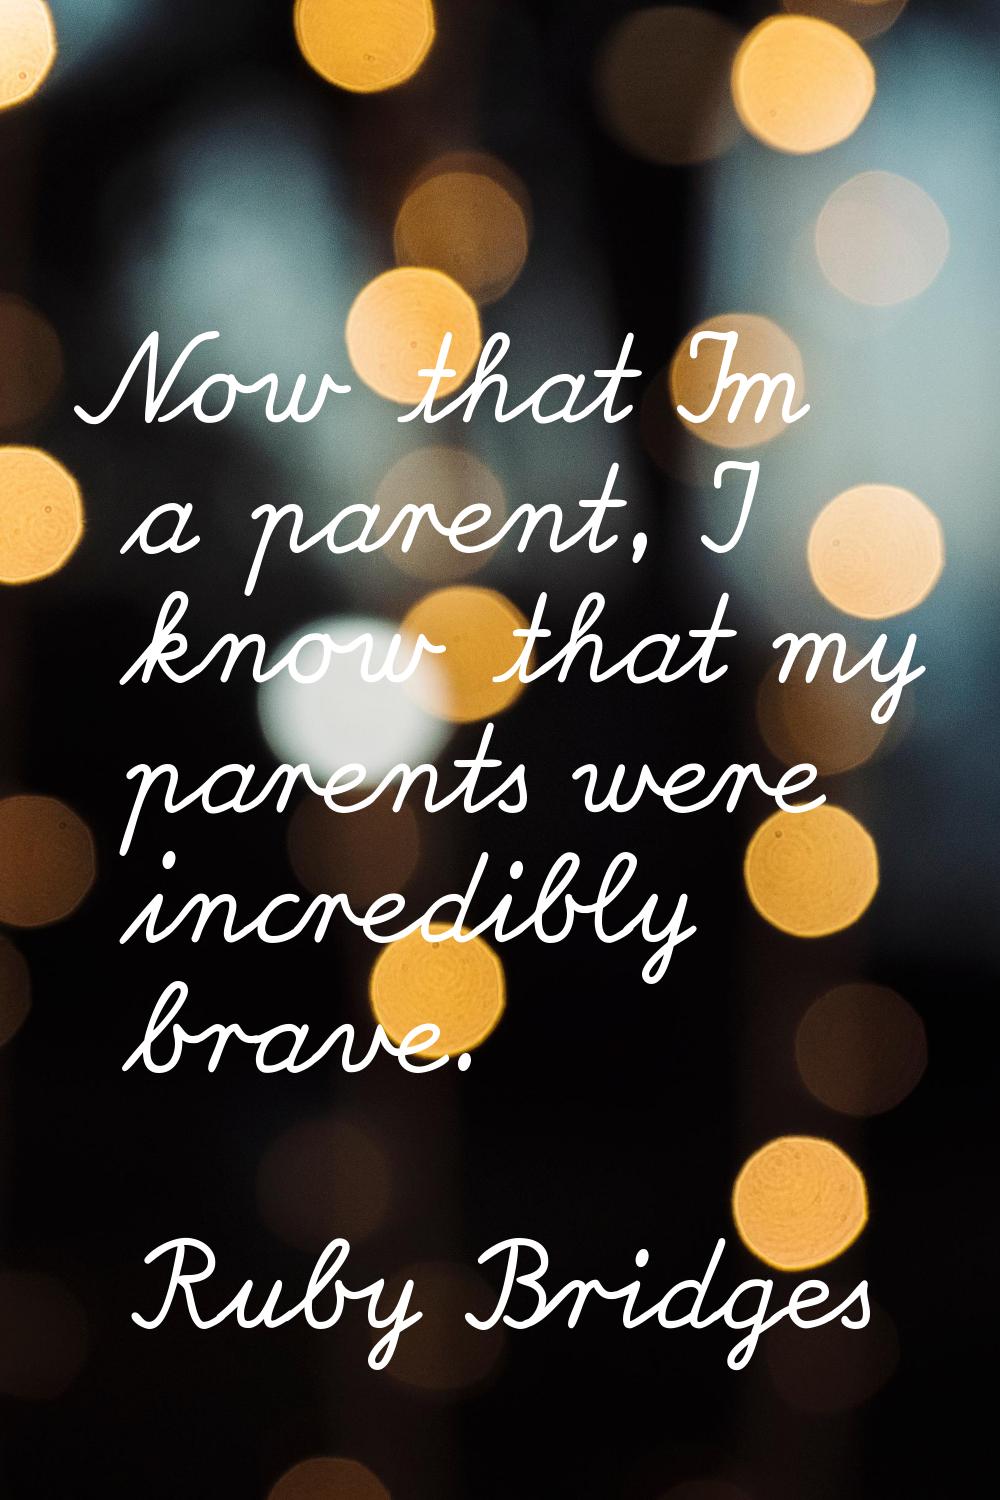 Now that I'm a parent, I know that my parents were incredibly brave.